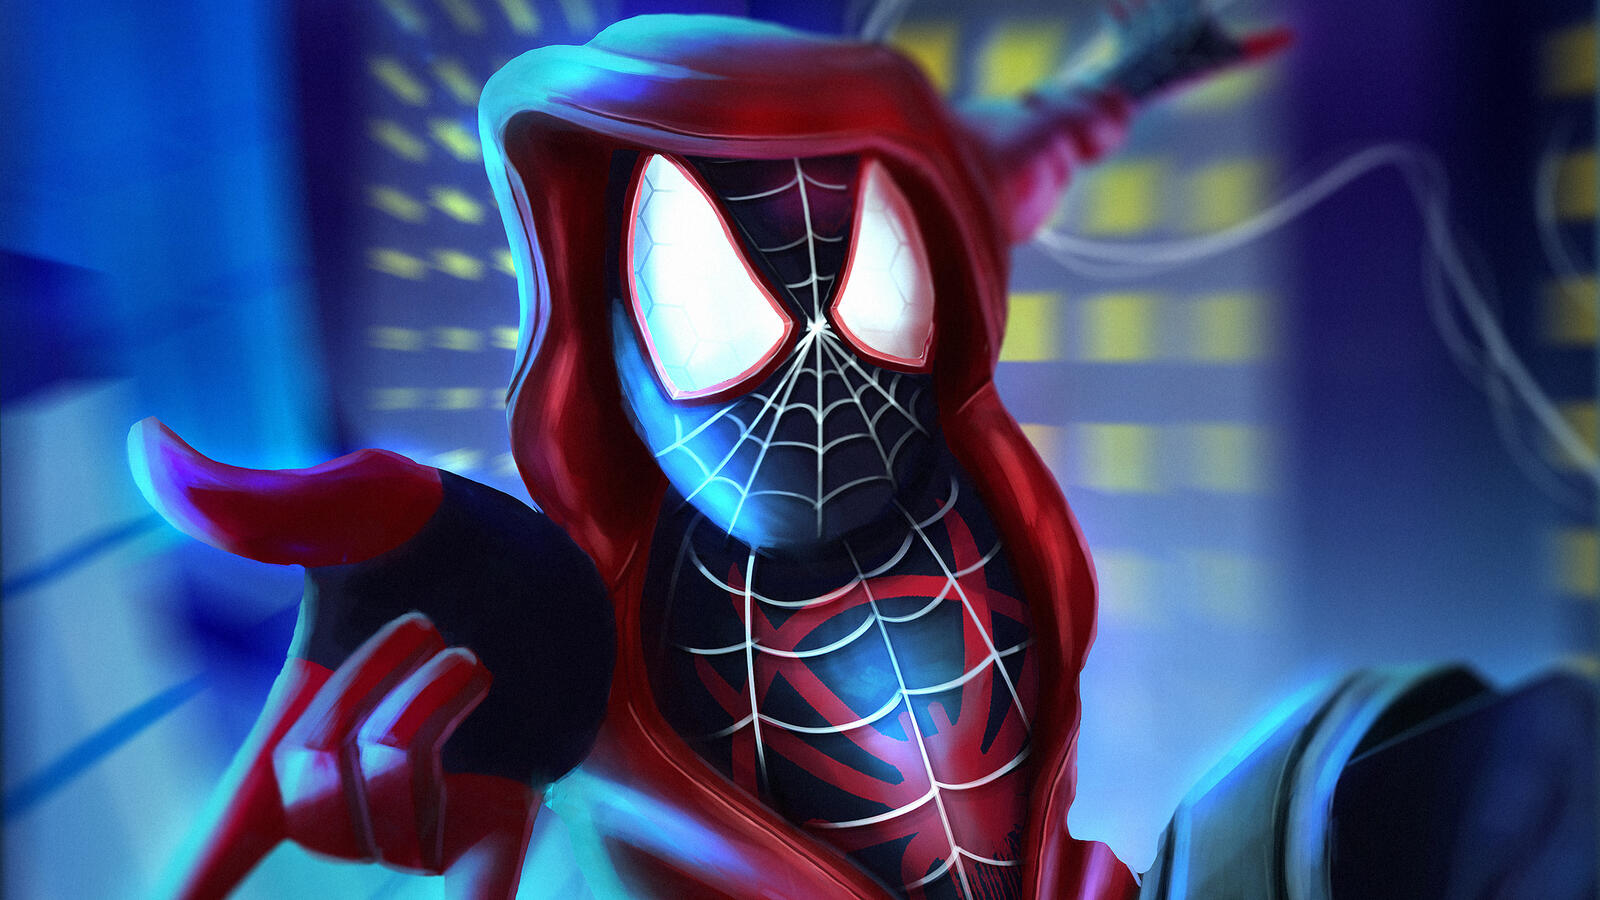 Wallpapers superheroes movies spiderman into the spider verse on the desktop